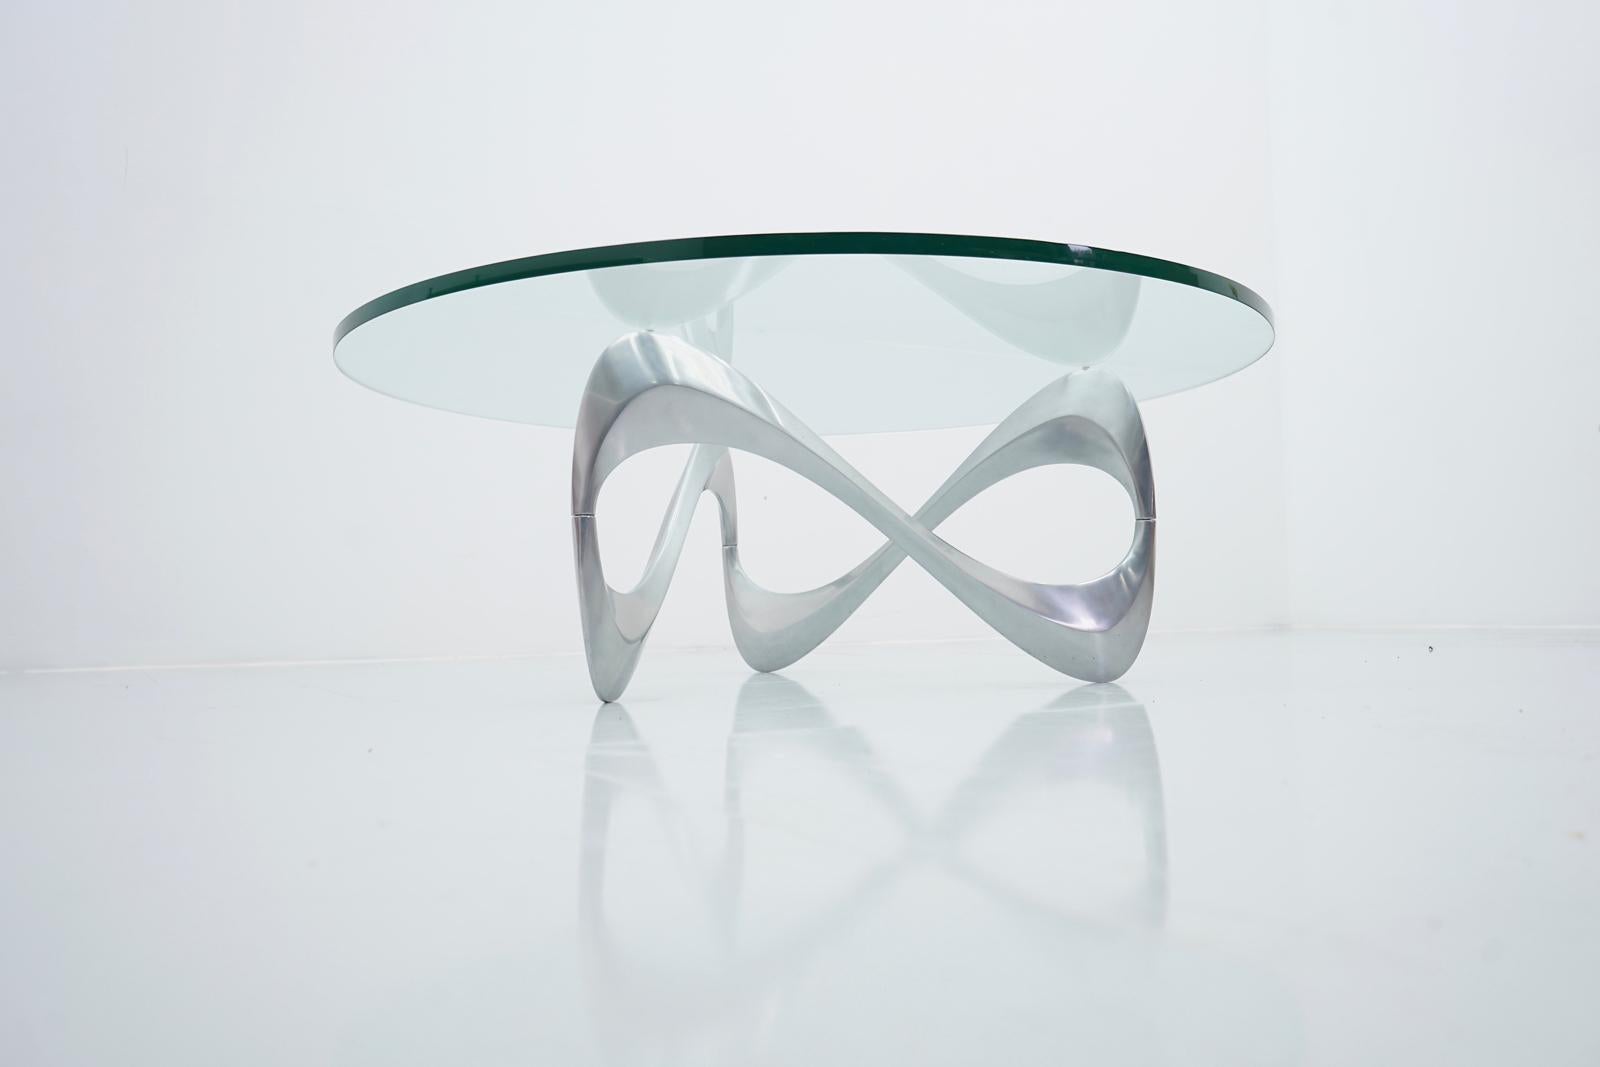 Knut Hesterberg coffee table made of aluminium and glass. The glass plate is 19mm thick and in very good condition without damage. Overall, the table looks great.
Dimensions: Height: 15.74 in. (40 cm) Diameter: 43.30 in. (110 cm) 